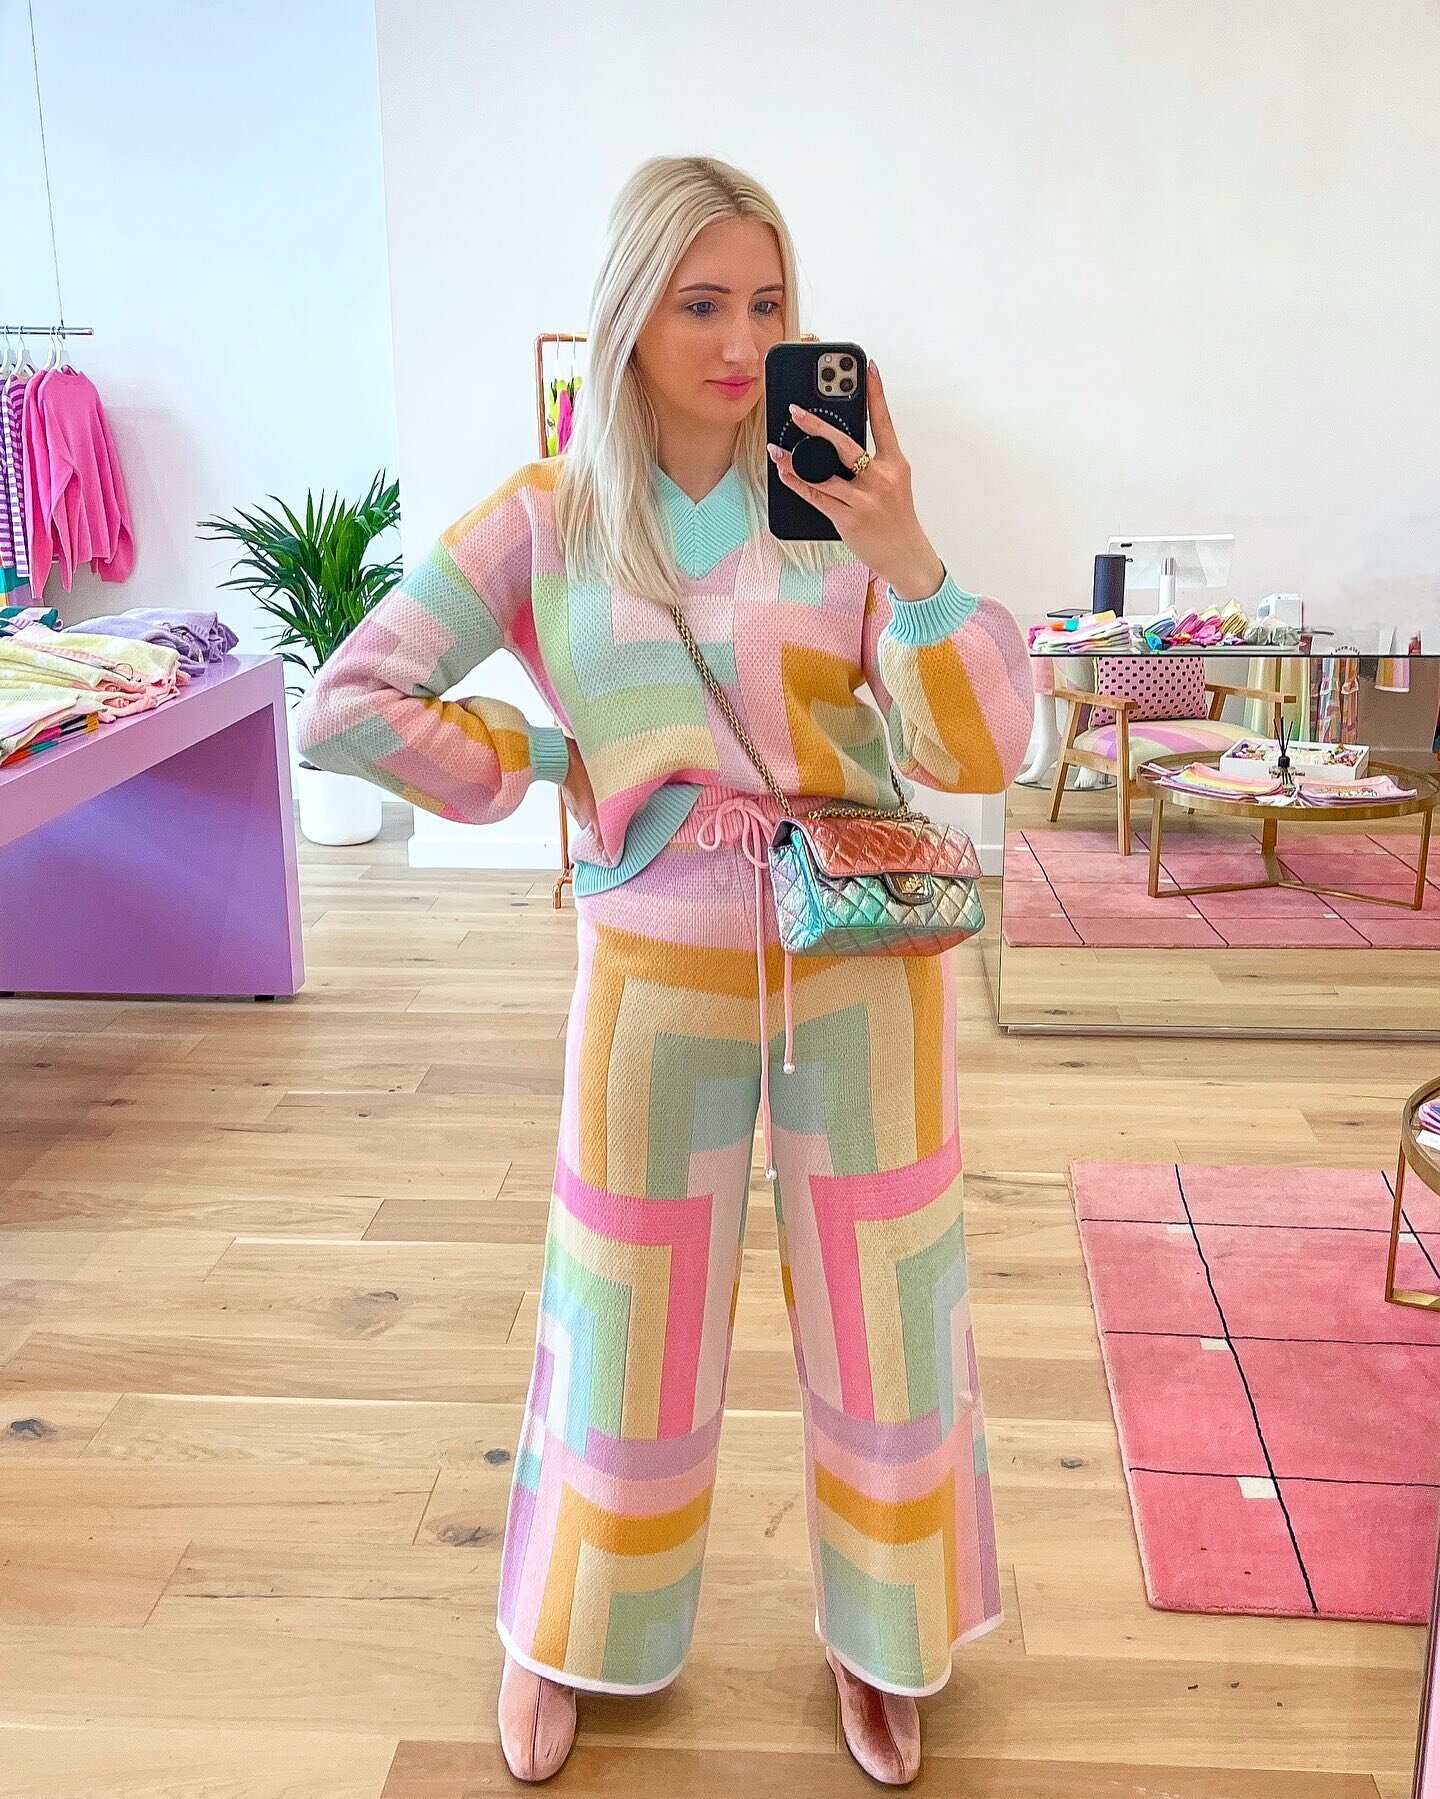 London shopping guide 🛍
.
London has all the shopping you could ever dream of. Here are some of my favorites (numbered by the pics in the post):
.
1/2 @oliviarubin opened the cutest shop filled with my favorite rainbow pieces
.
3-5 @theofficialselfr